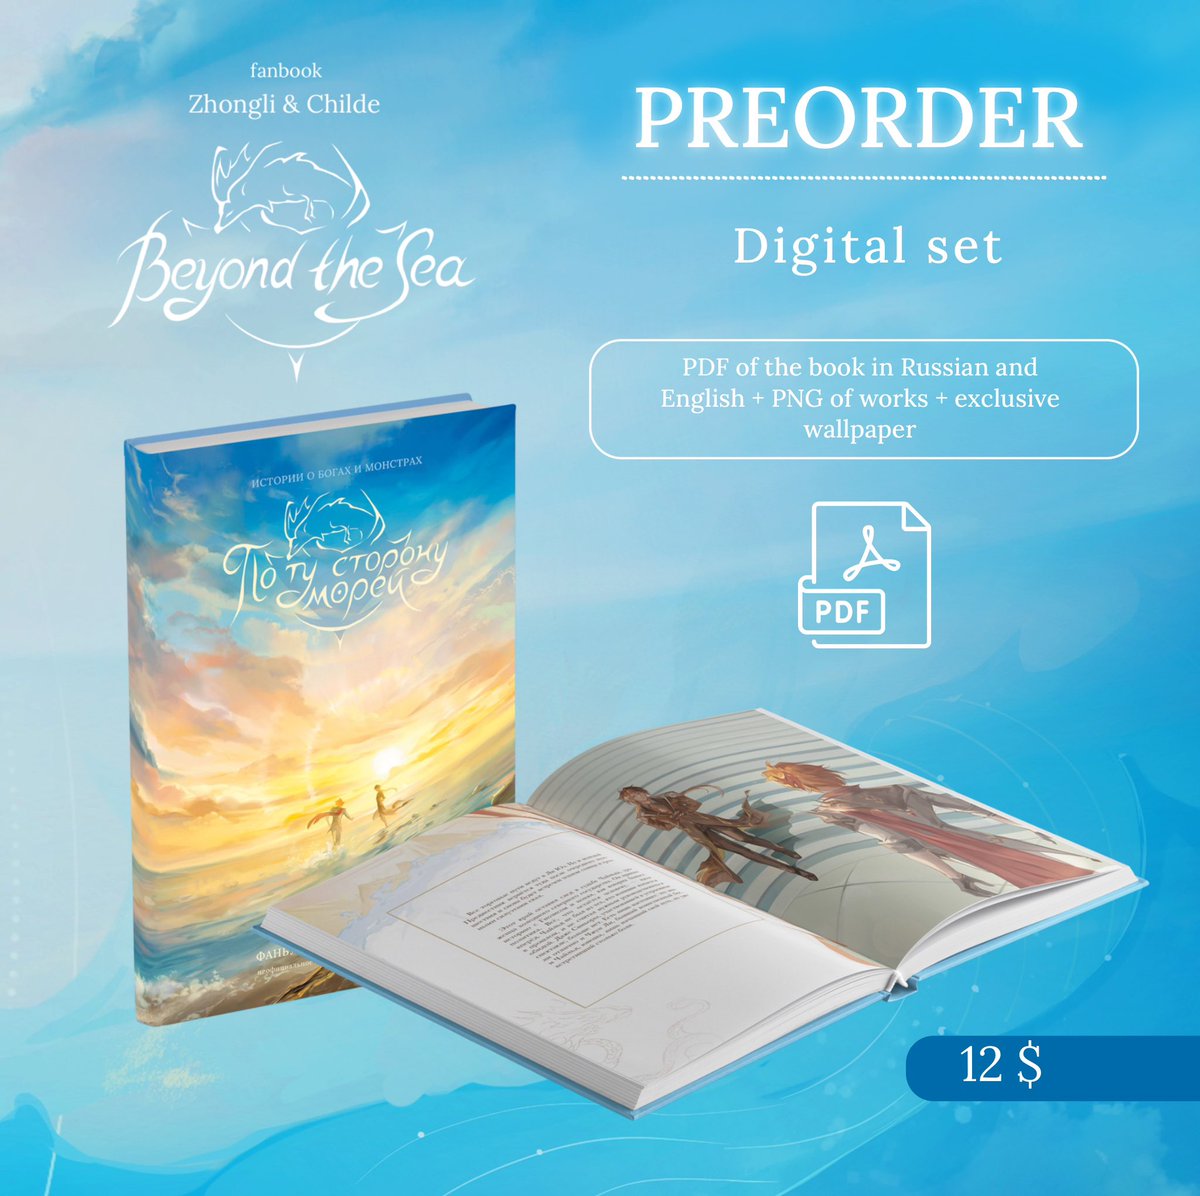 Warm wind carries away the rustle of waves on the seashore… 🌊PRE-ORDERS FOR THE FANBOOK 'BEYOND THE SEA' ARE NOW OPEN! PRE-ORDERS TIME: September 1, 02:00 - October 10, 15:59 EST PRE-ORDER: docs.google.com/forms/d/e/1FAI…